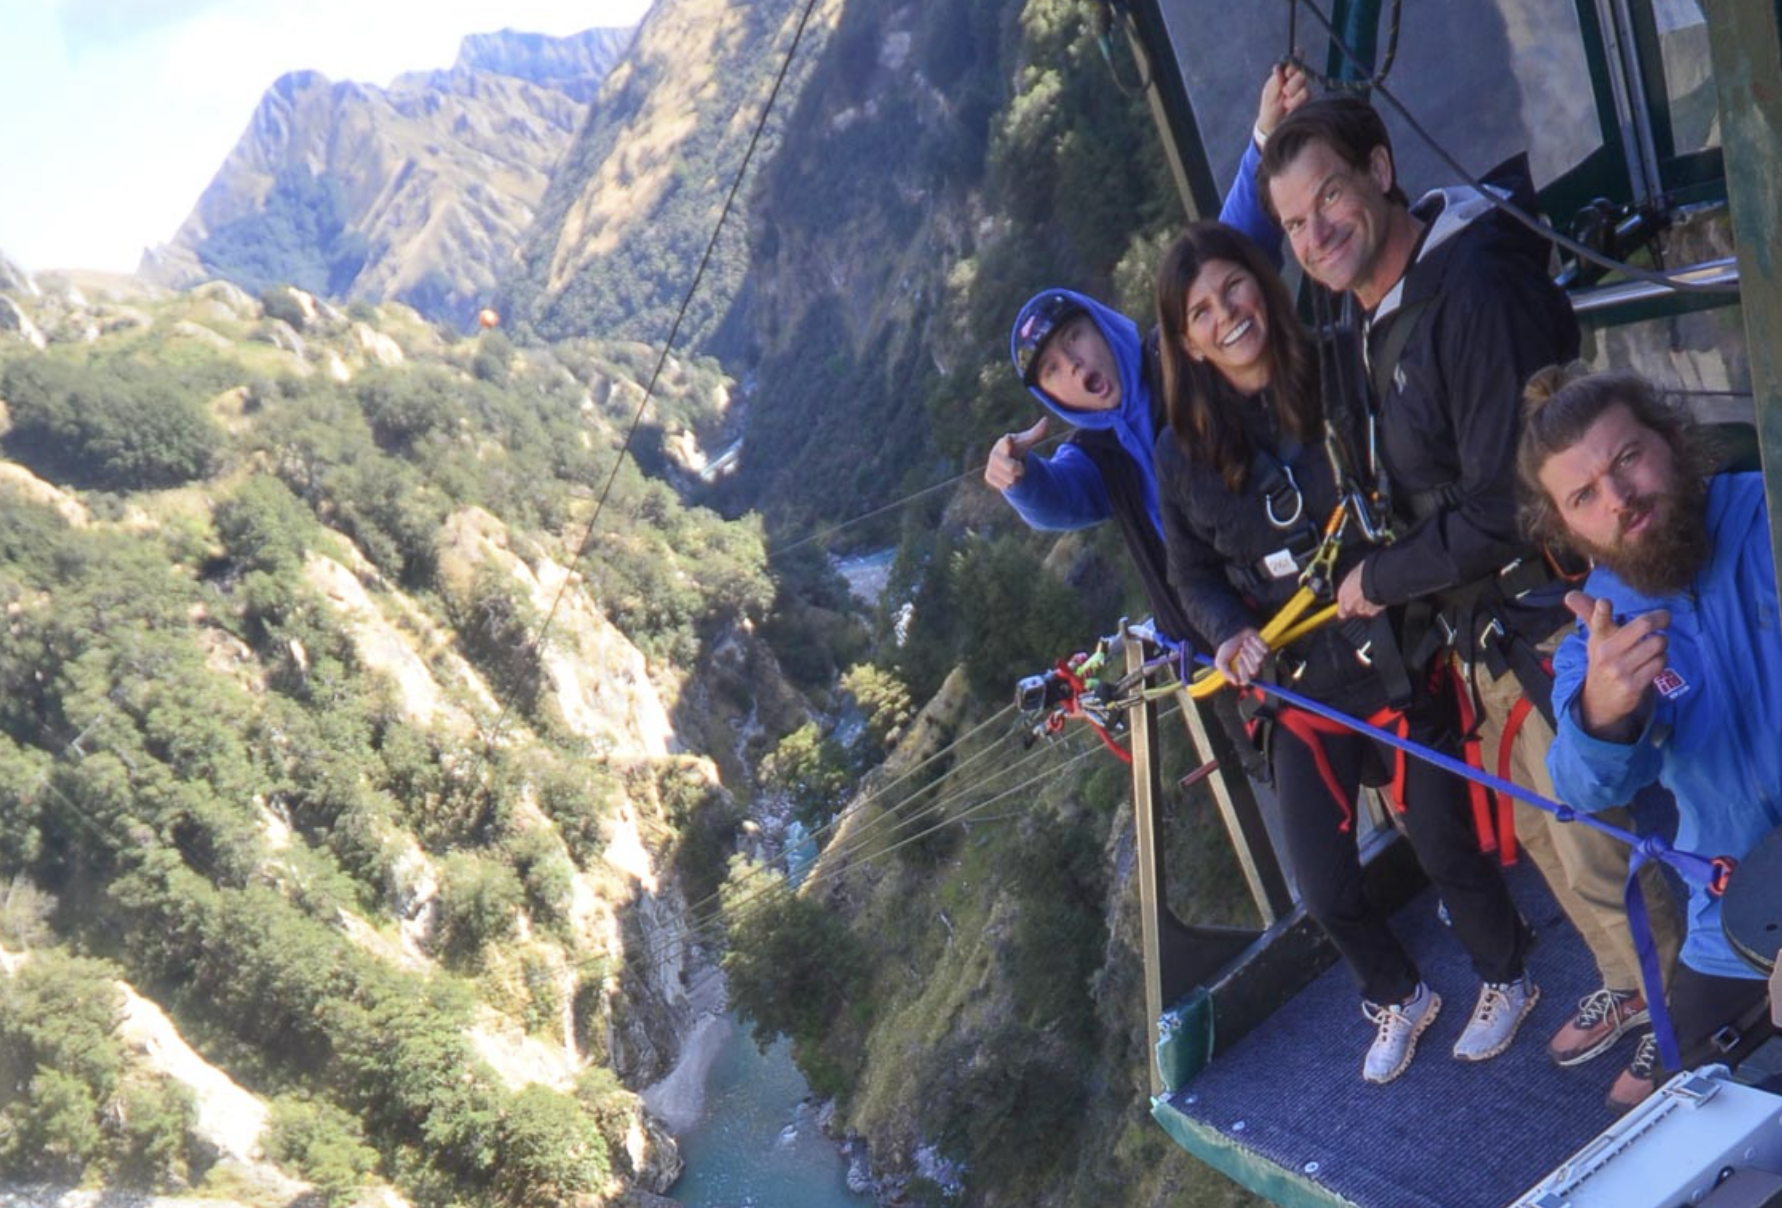 High Adventure things to do in New Zealand